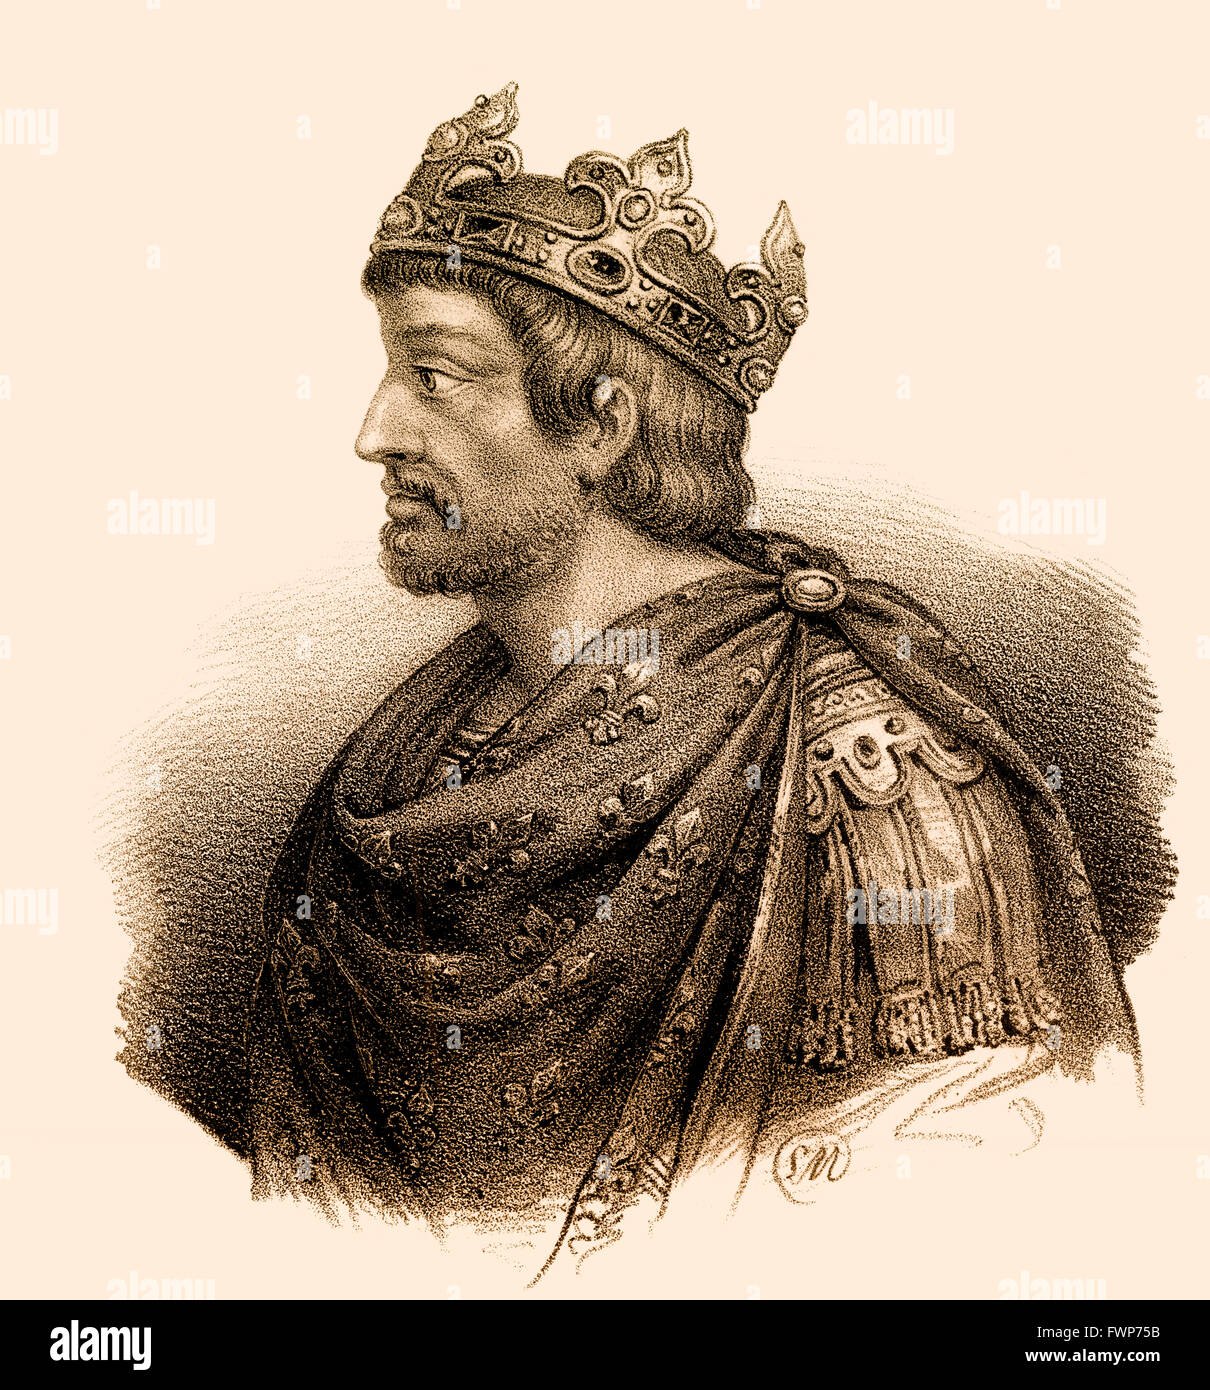 Pepin le Bref, Pepin the Younger, Pepin III or Pippin the Short, c.  714-768, King of the Franks, Pepin le Bref, Pippin der Jünge Stock Photo -  Alamy